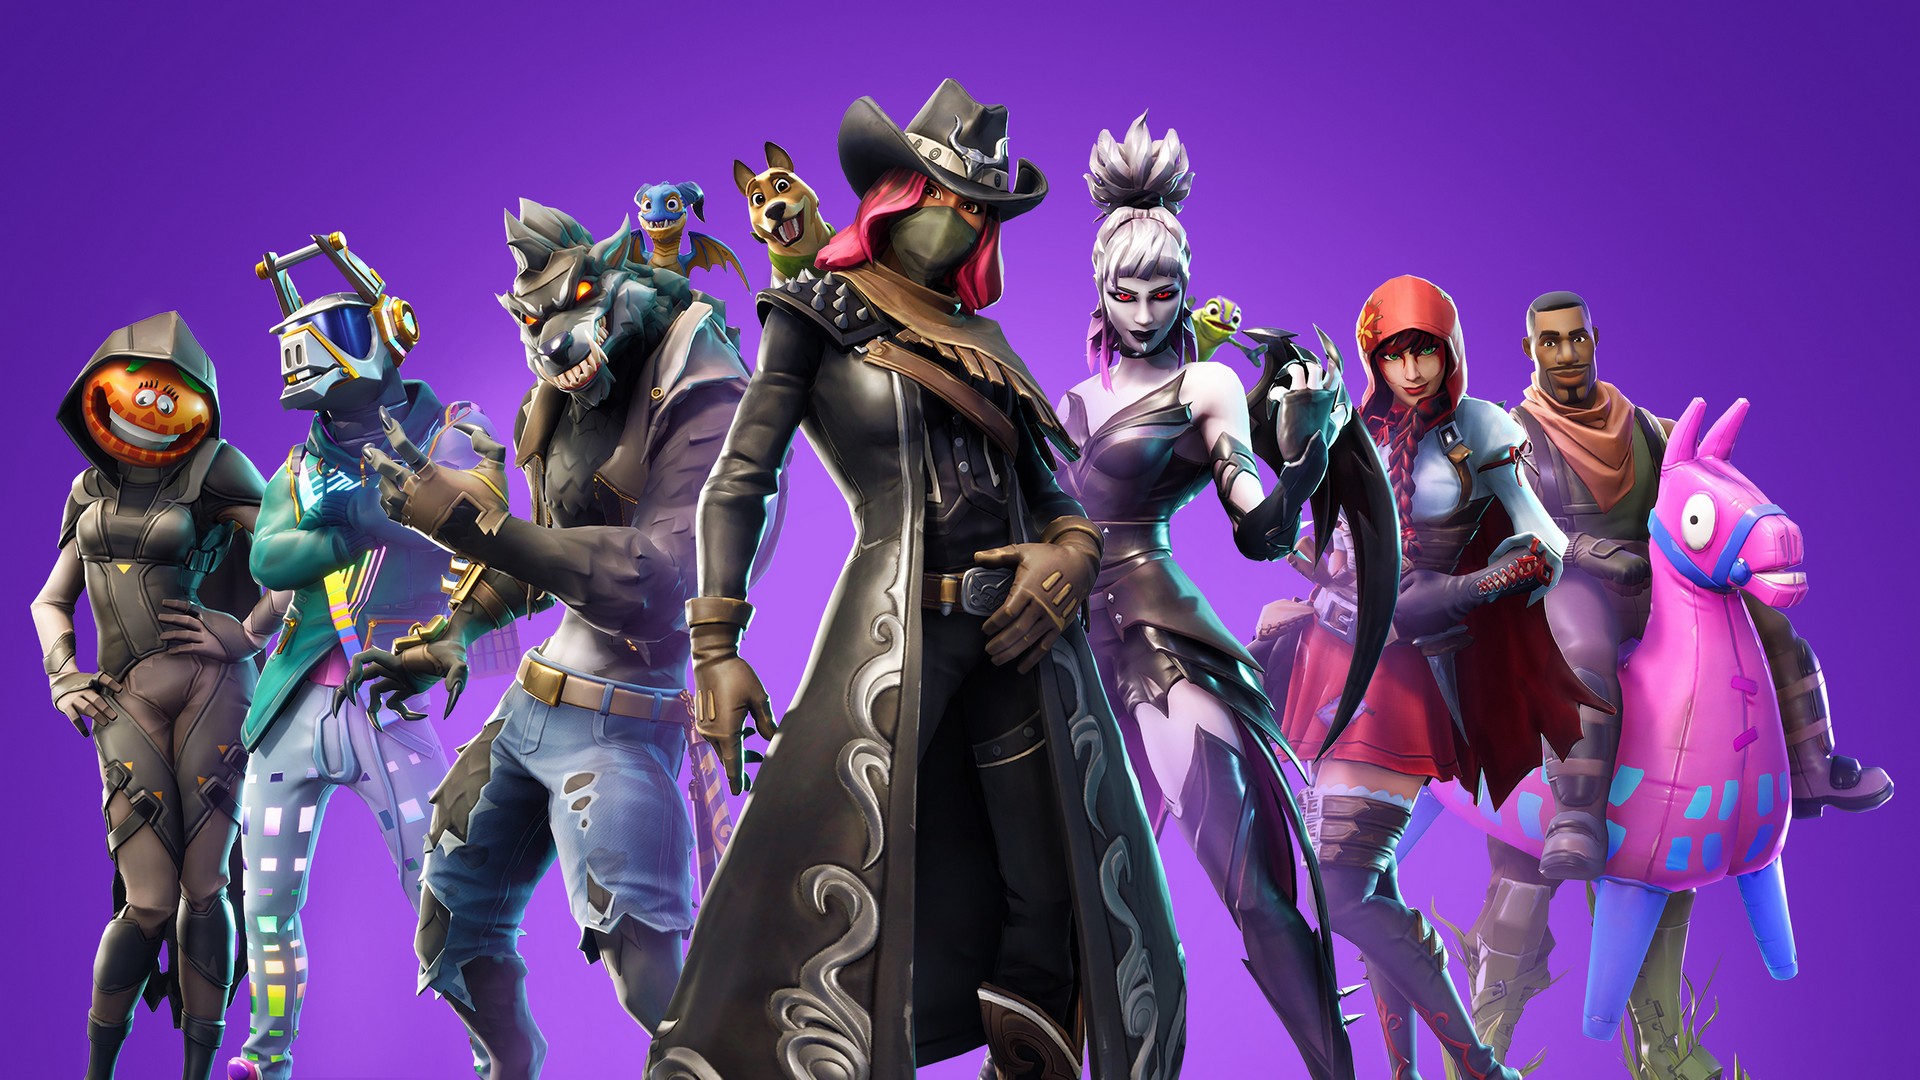 Fortnite Desktop Wallpaper with high-resolution 1920x1080 pixel. You can use this wallpaper for your Windows and Mac OS computers as well as your Android and iPhone smartphones